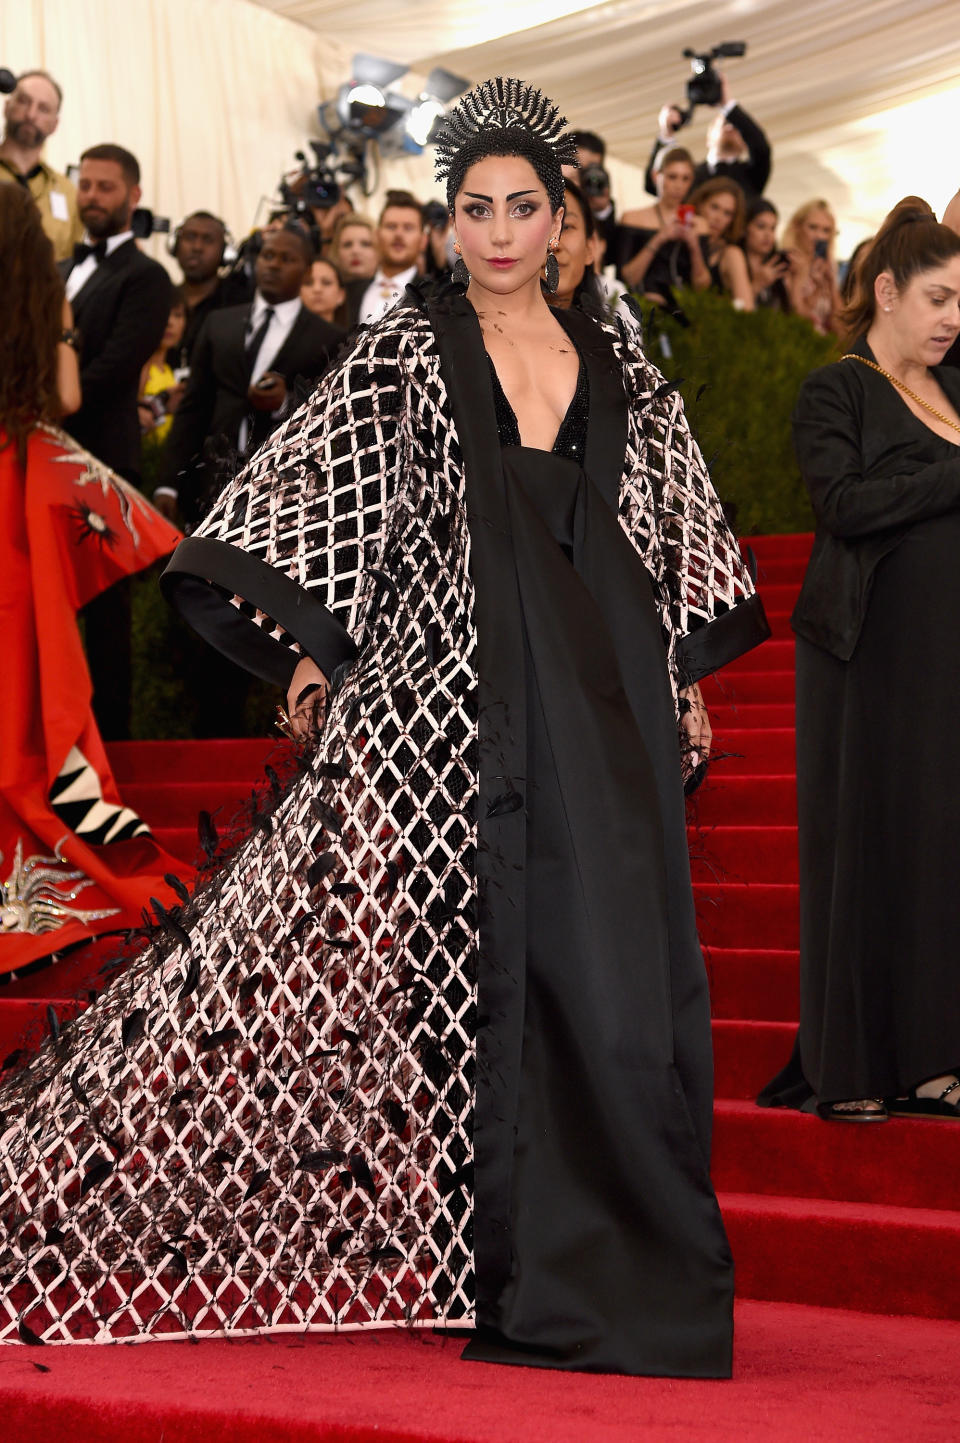 The most outrageous looks from the Met Gala